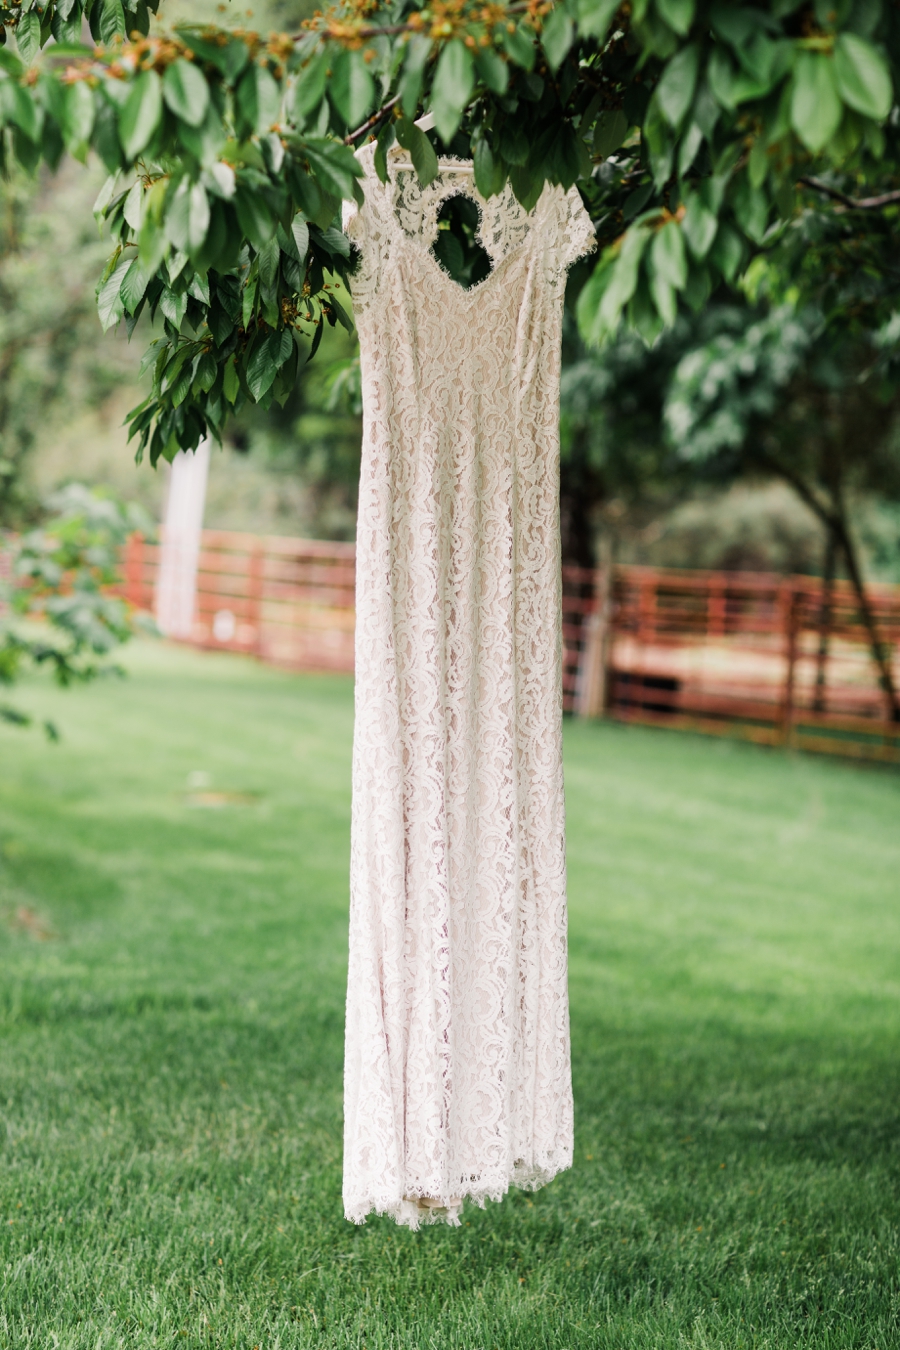 Mountain Wedding Photography by Amy Galbraith at the Brown Family Homestead in Leavenworth, Washington with lace wedding gown